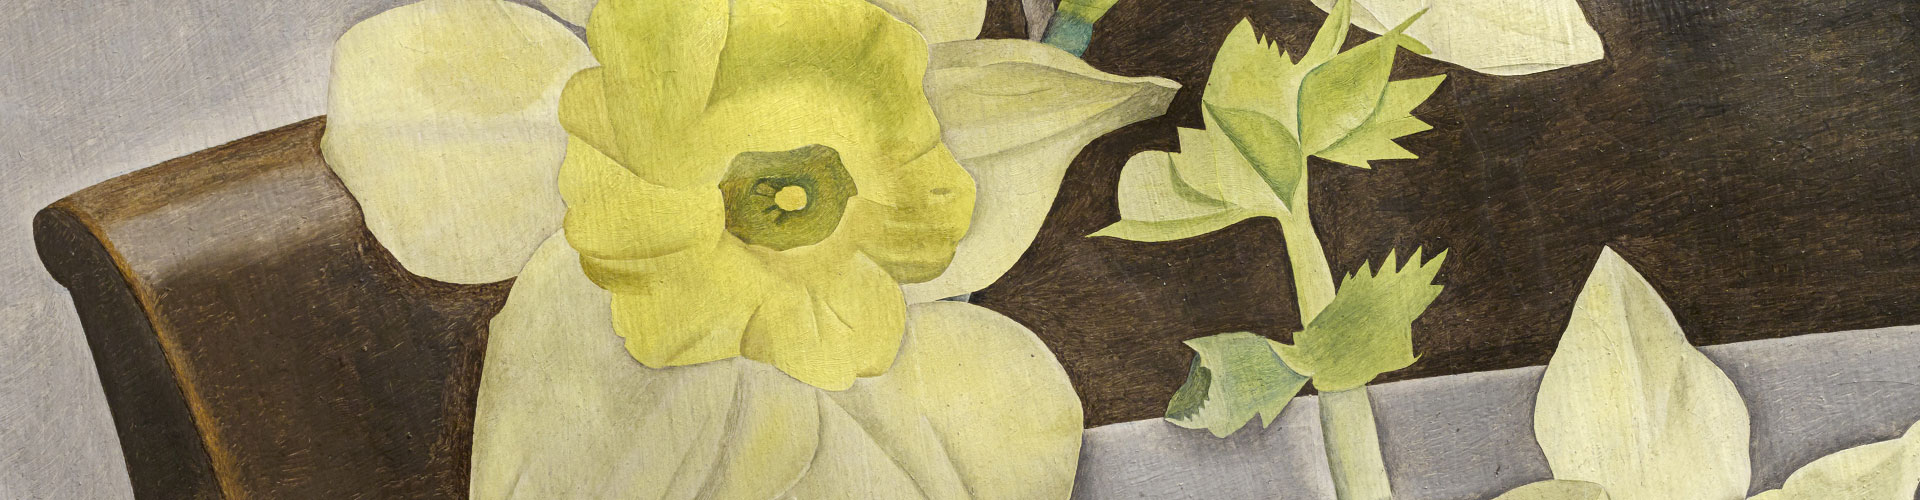 Daffodils and Celery, Greeting Card by Lucian Freud - Featured on Desktop Devices